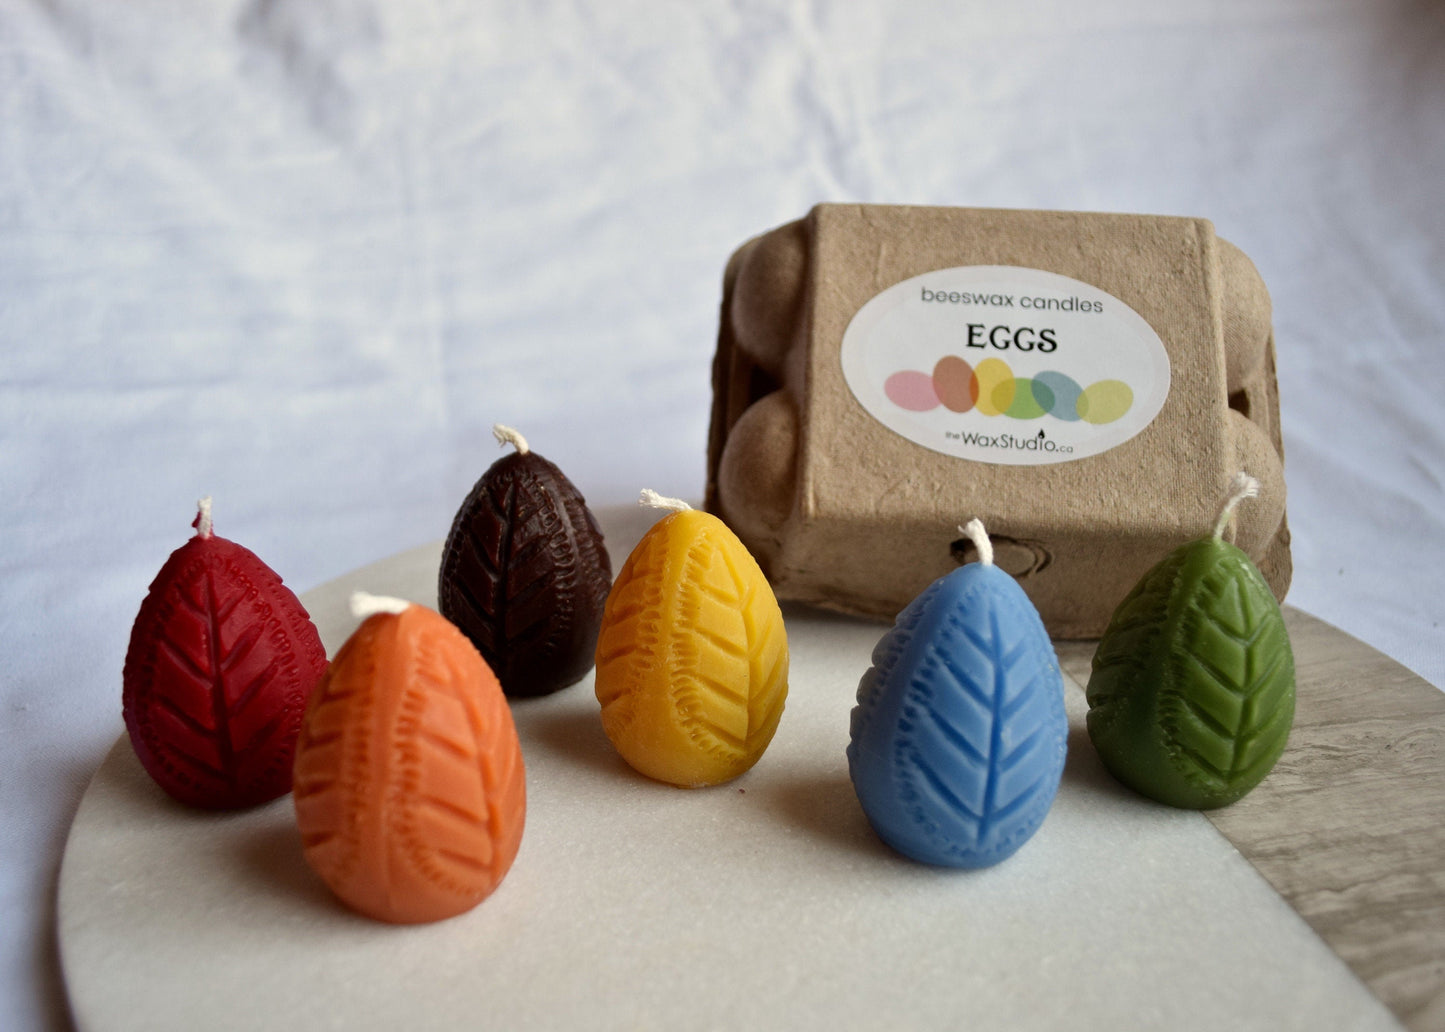 Pastels EGG SET beeswax candles / PASTELS / eggs / Easter eggs / beeswax candle, individual or SET of 6